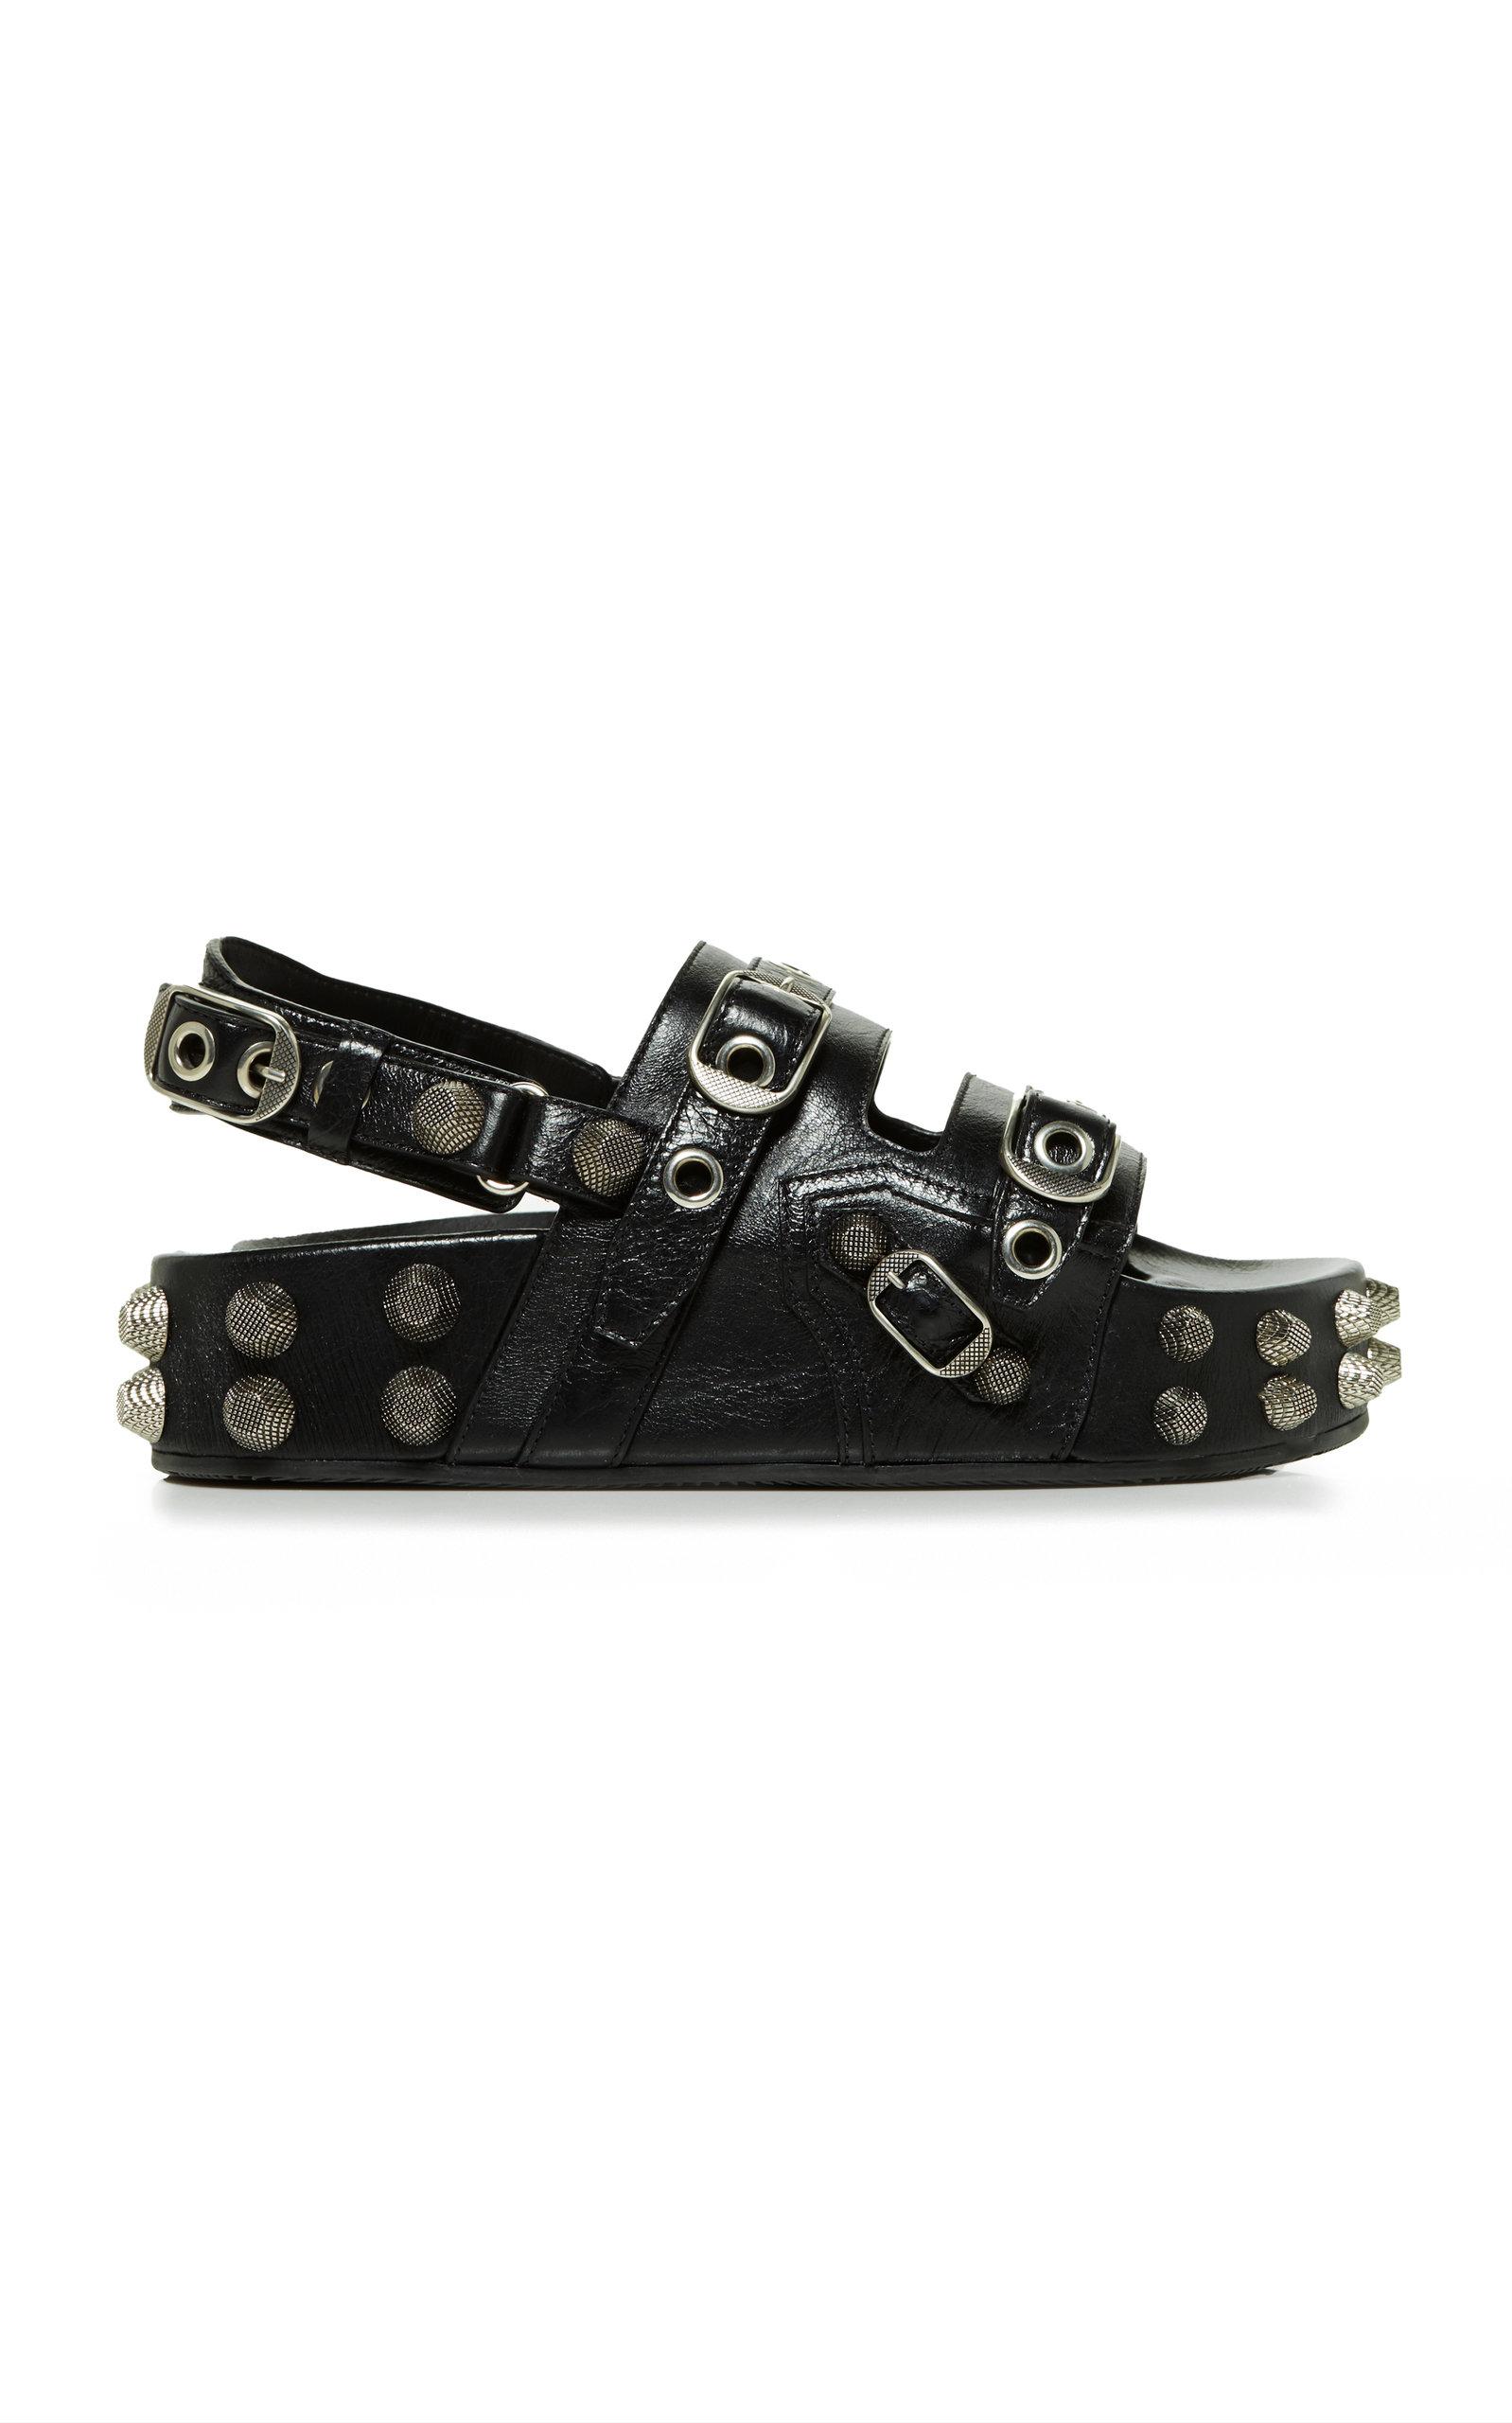 Balenciaga Cagole Studded Leather Sandals in Black | Lyst